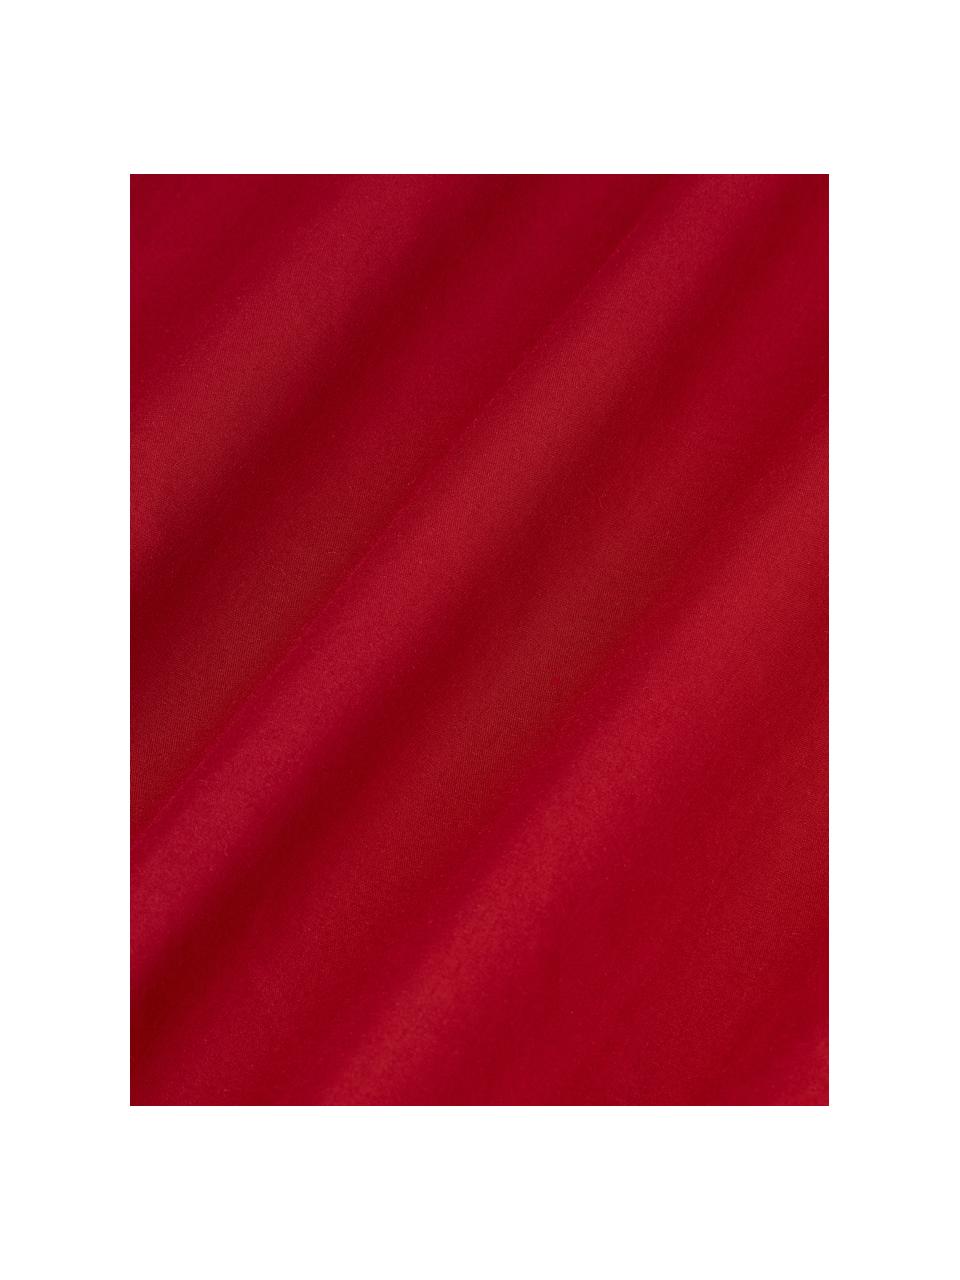 Lenzuolo con angoli topper in cotone percalle Elsie, Rosso, Larg. 90 x Lung. 200 cm, Alt. 15 cm